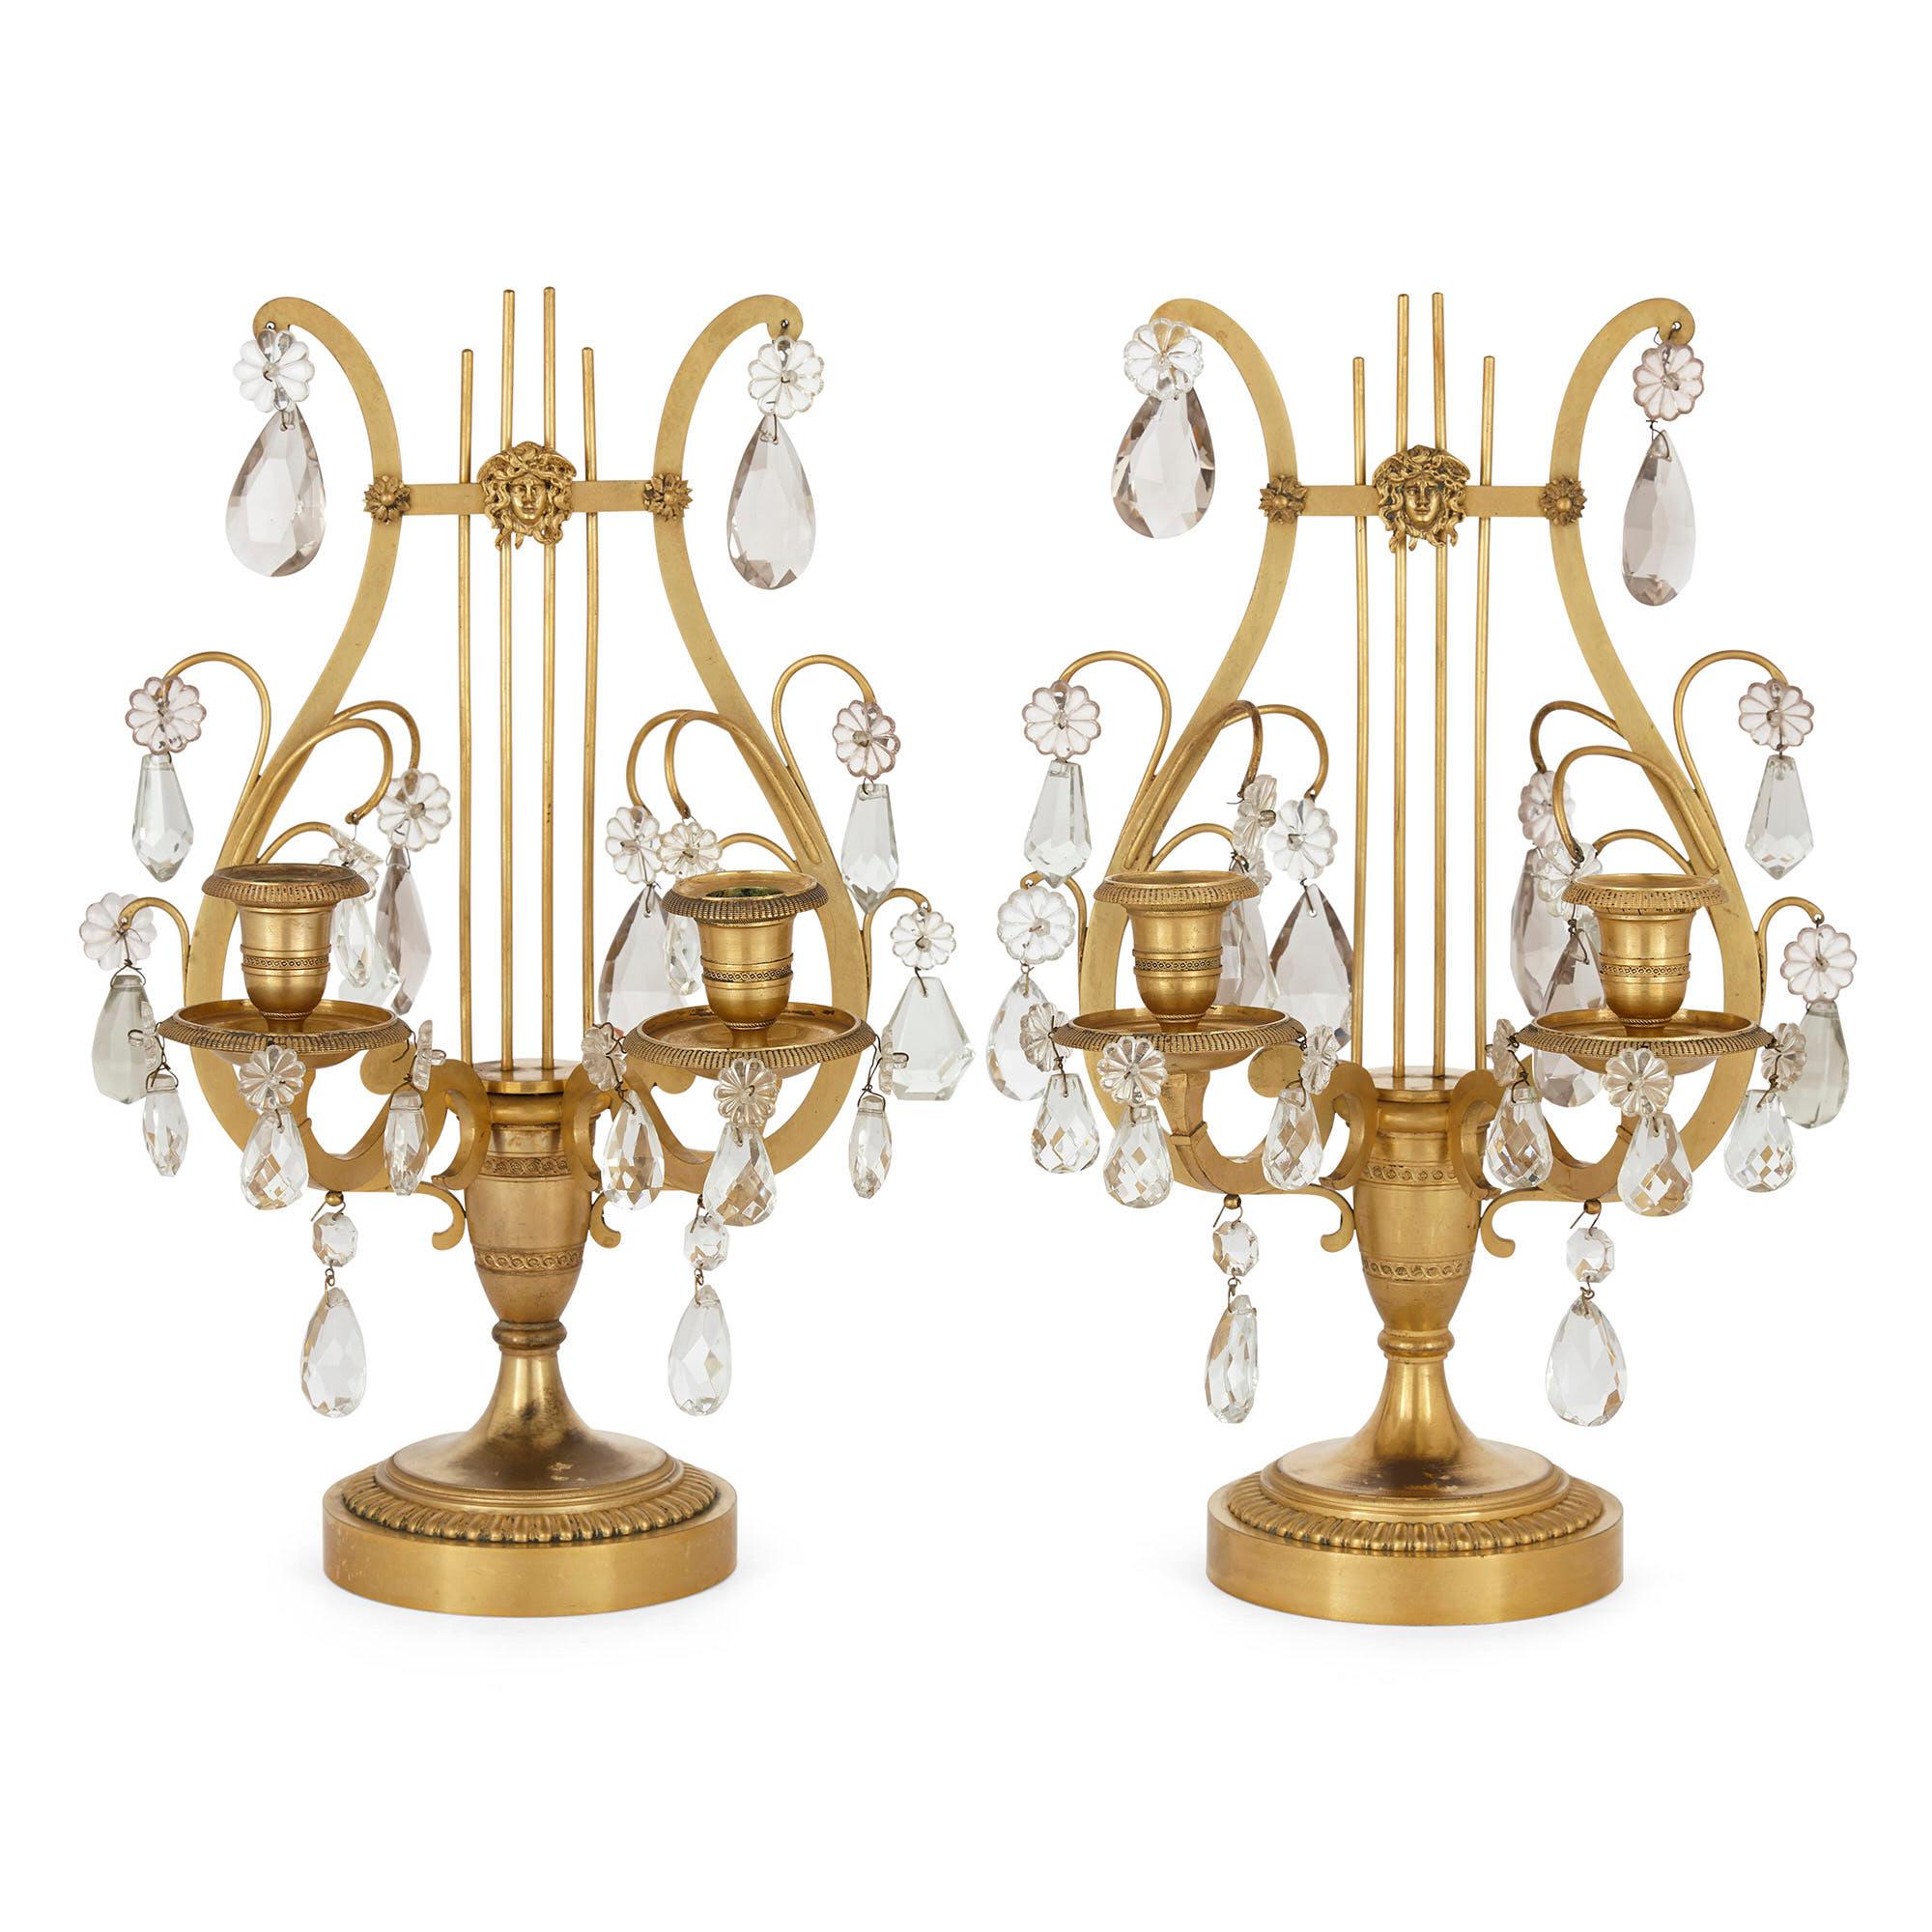 Pair of neoclassical Louis XVI style crystal and gilt bronze lyre candelabra,
French, 19th century
Dimensions: Height 40cm, width 26cm, depth 24cm

Inspired by the neoclassical Louis XVI style, this superb pair of ormolu table candelabra are